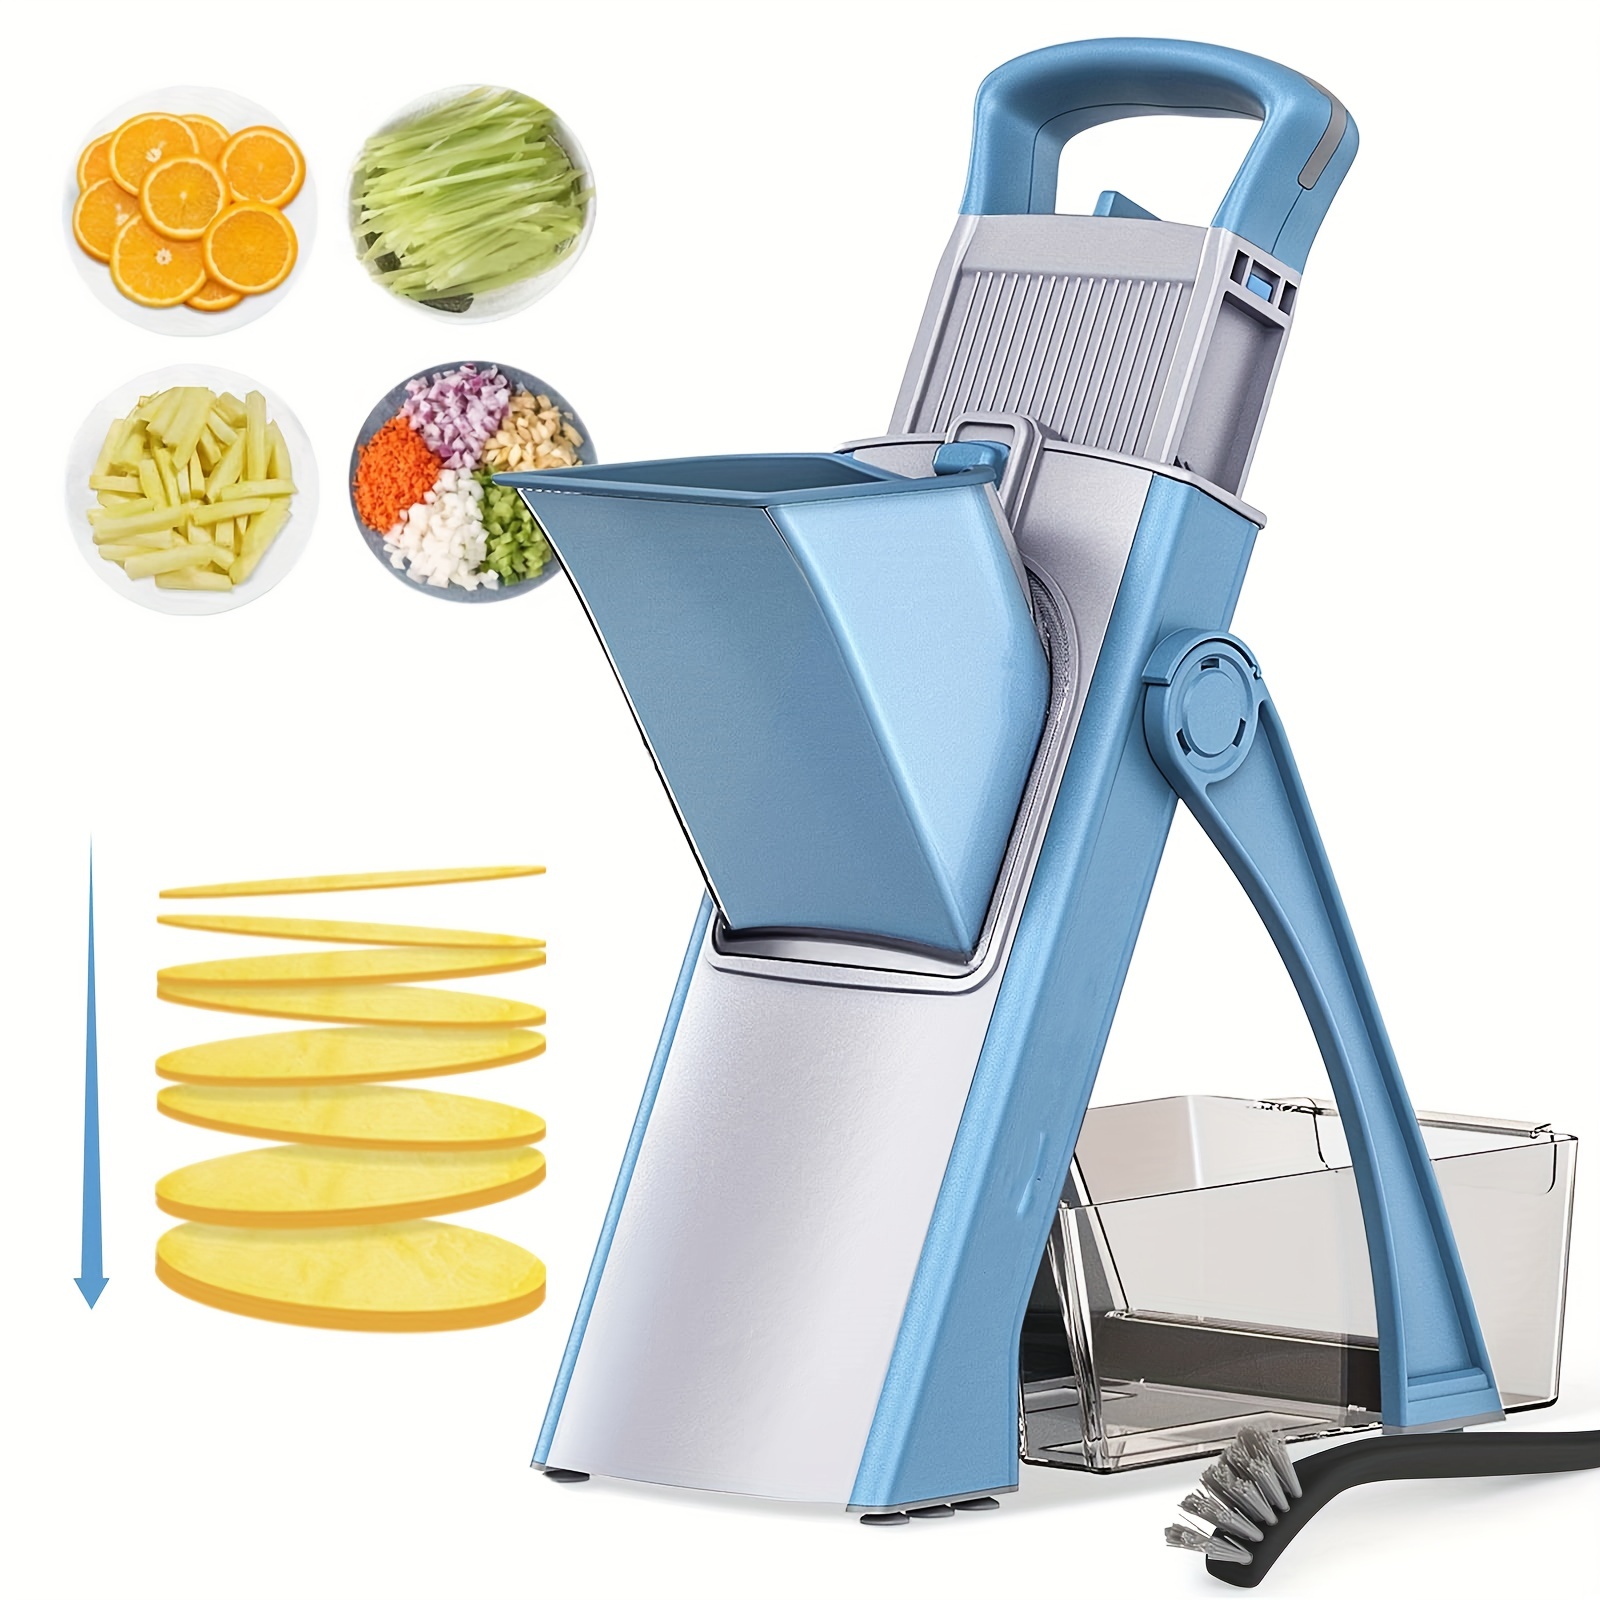 Multifunctional Mandolin Slicer And Vegetable Grater - Easy To Use